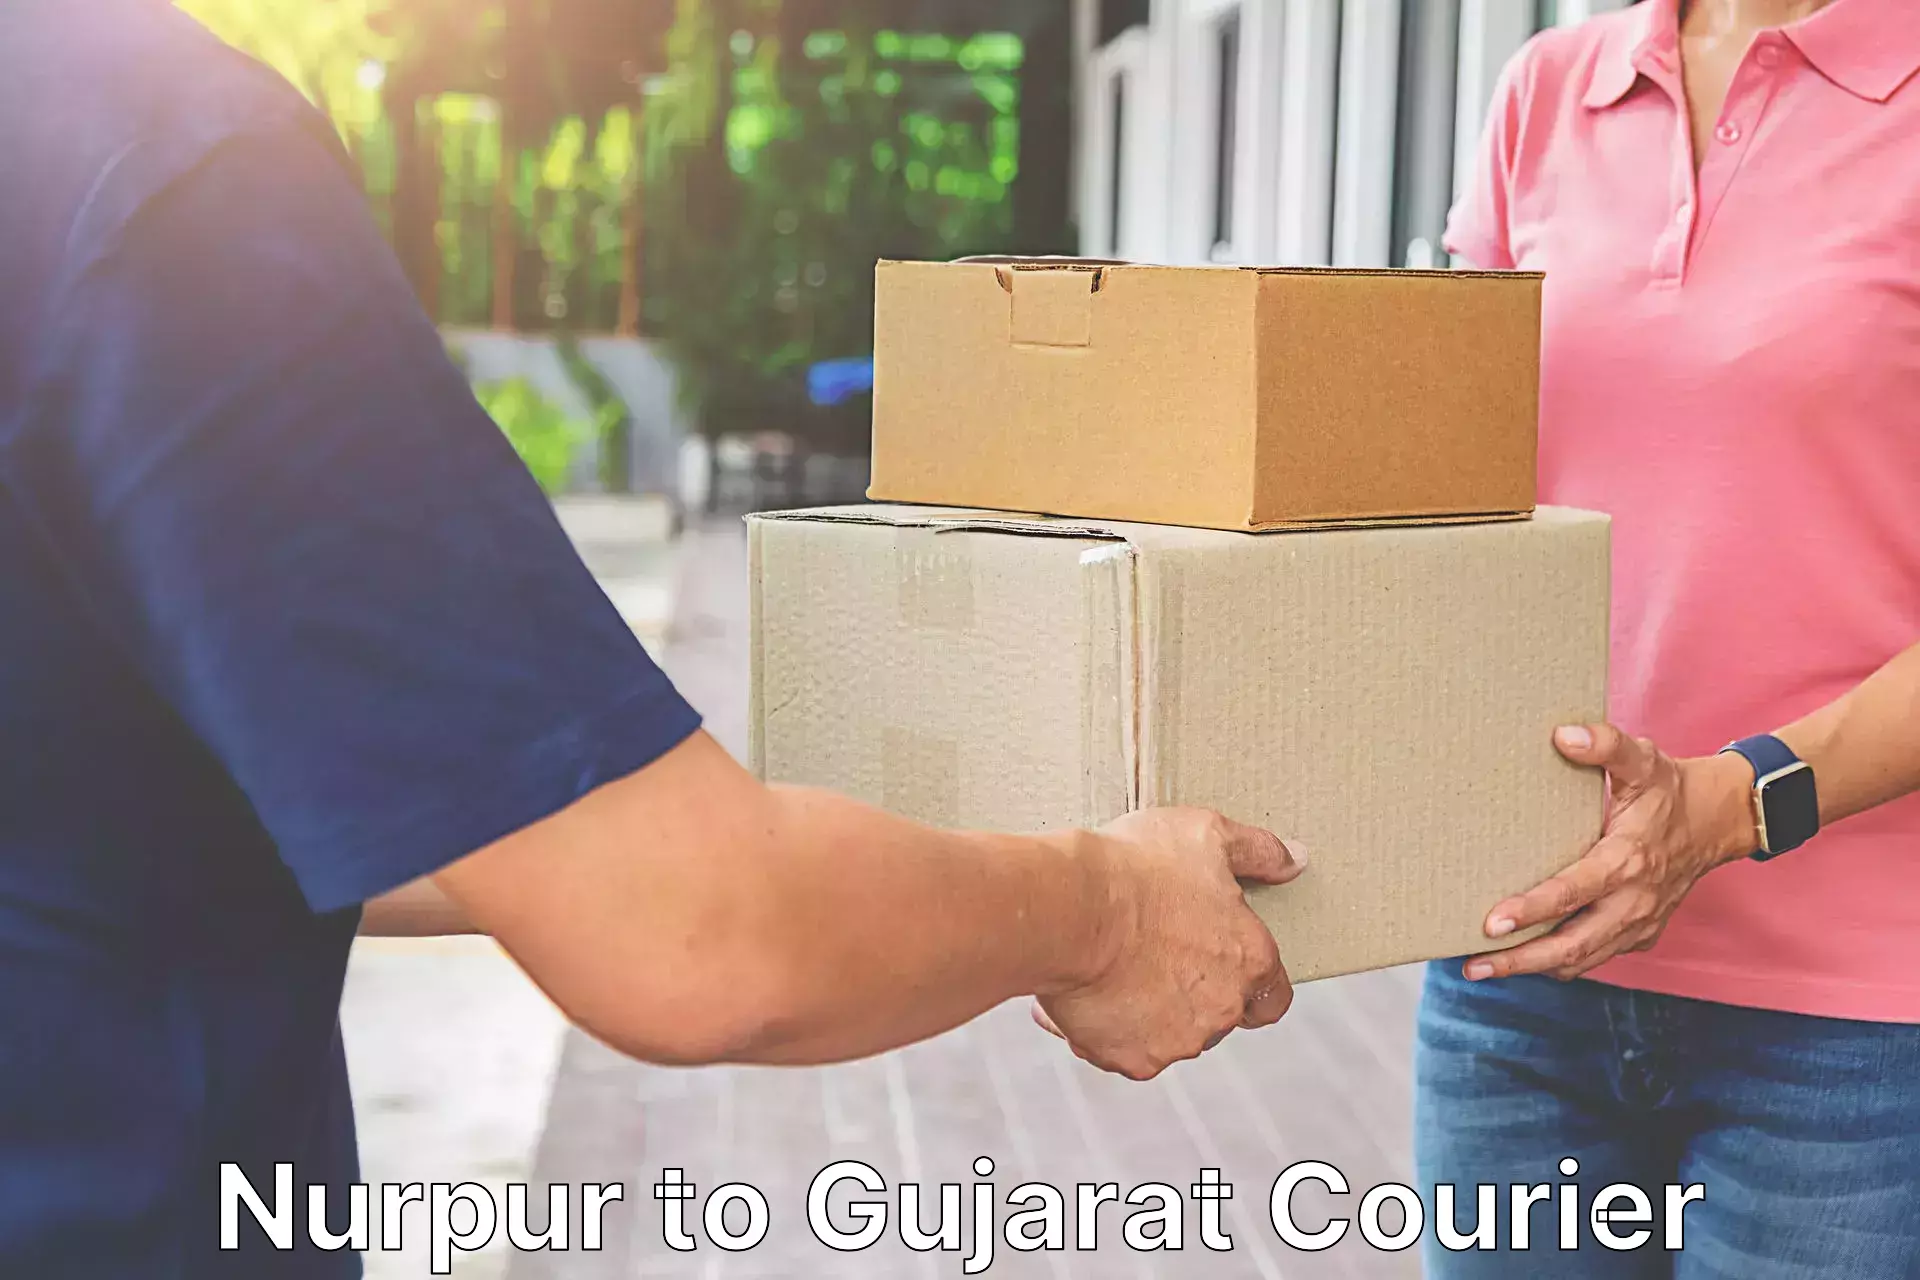 Efficient shipping operations Nurpur to Ahmedabad